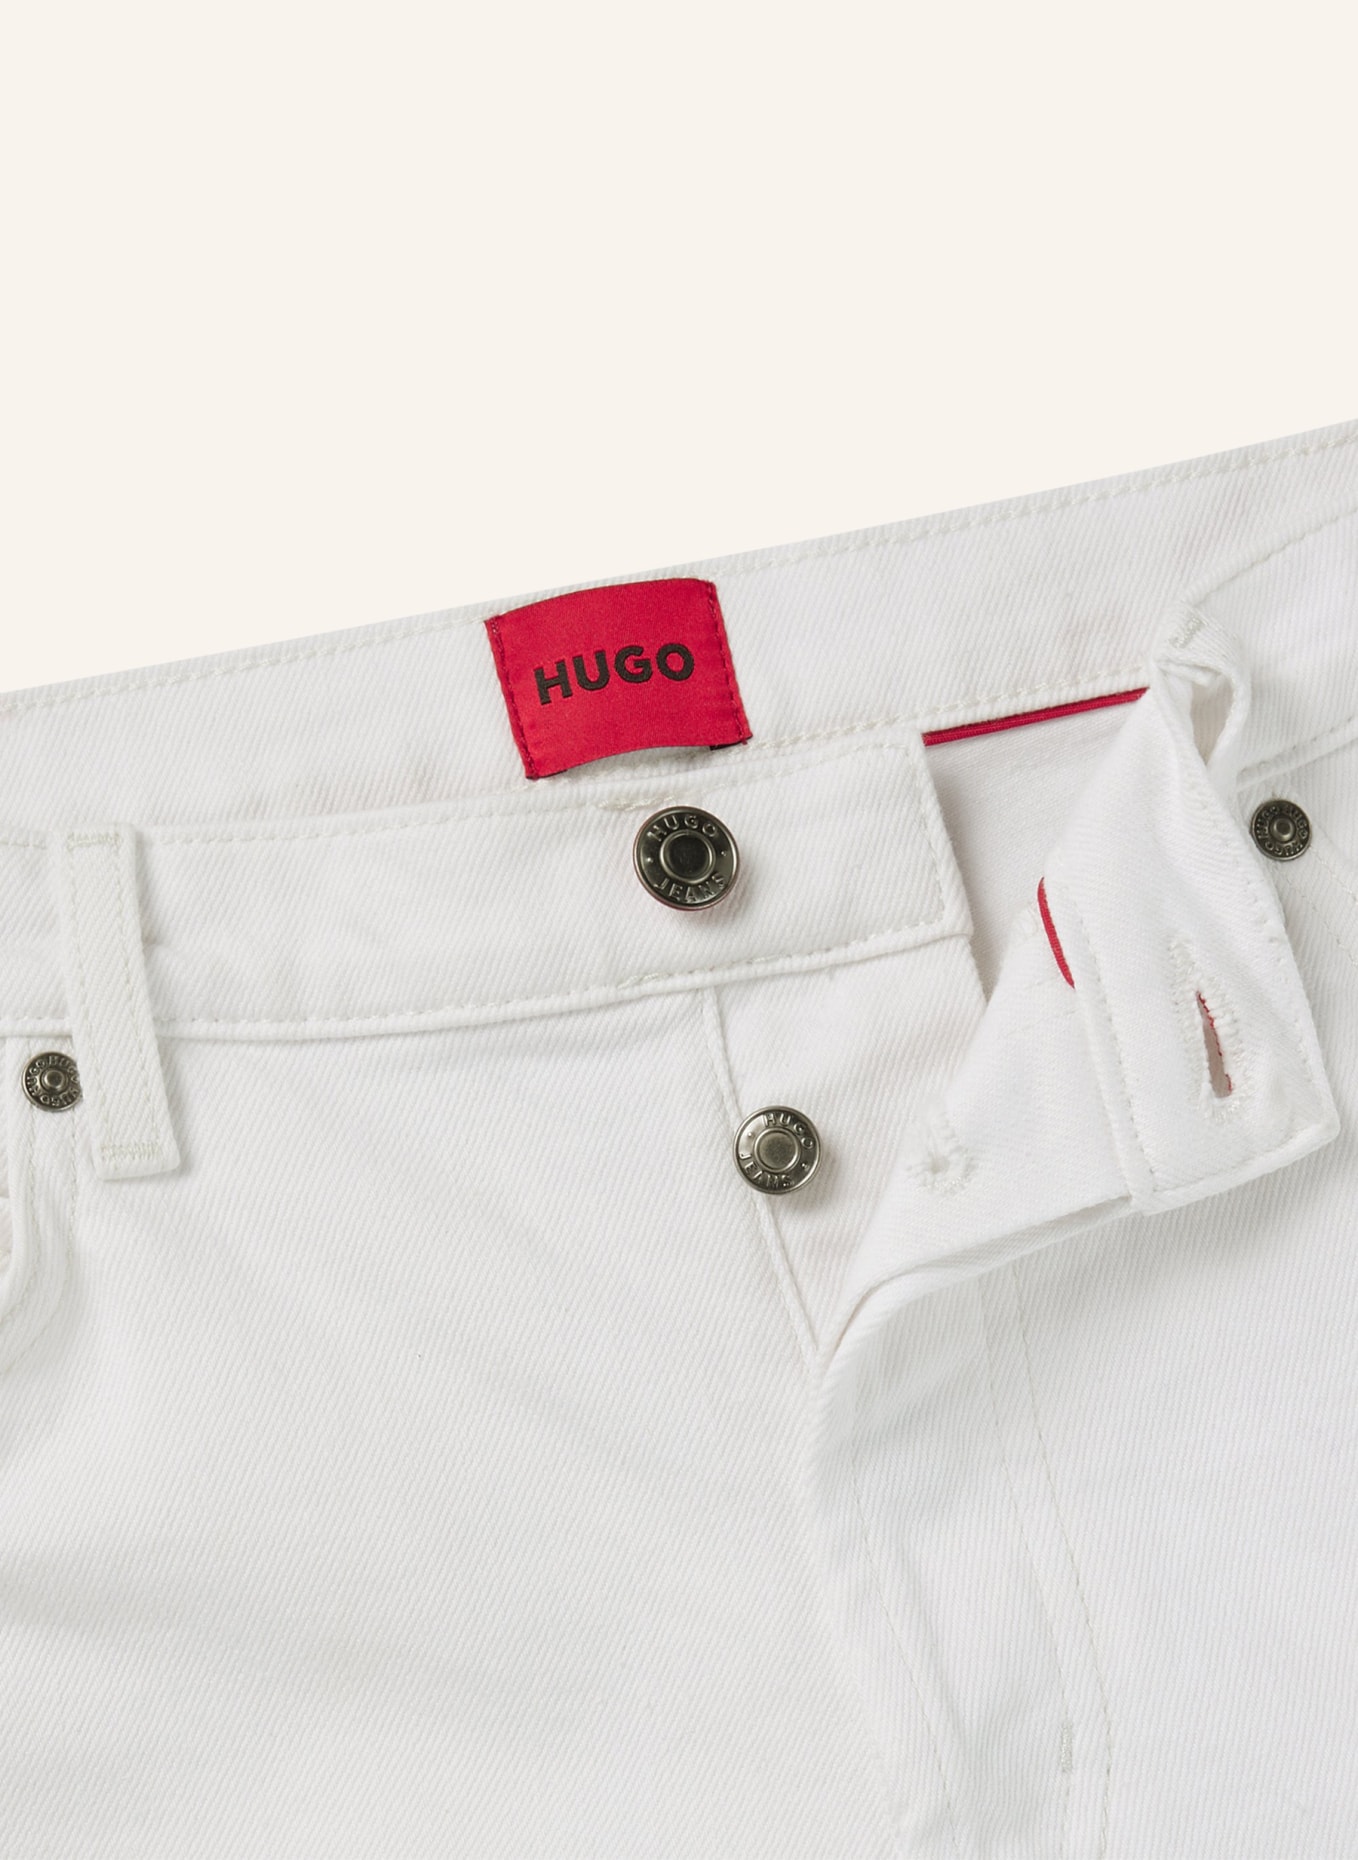 HUGO Jeans HUGO 634/S Tapered Fit, Farbe: WEISS (Bild 2)